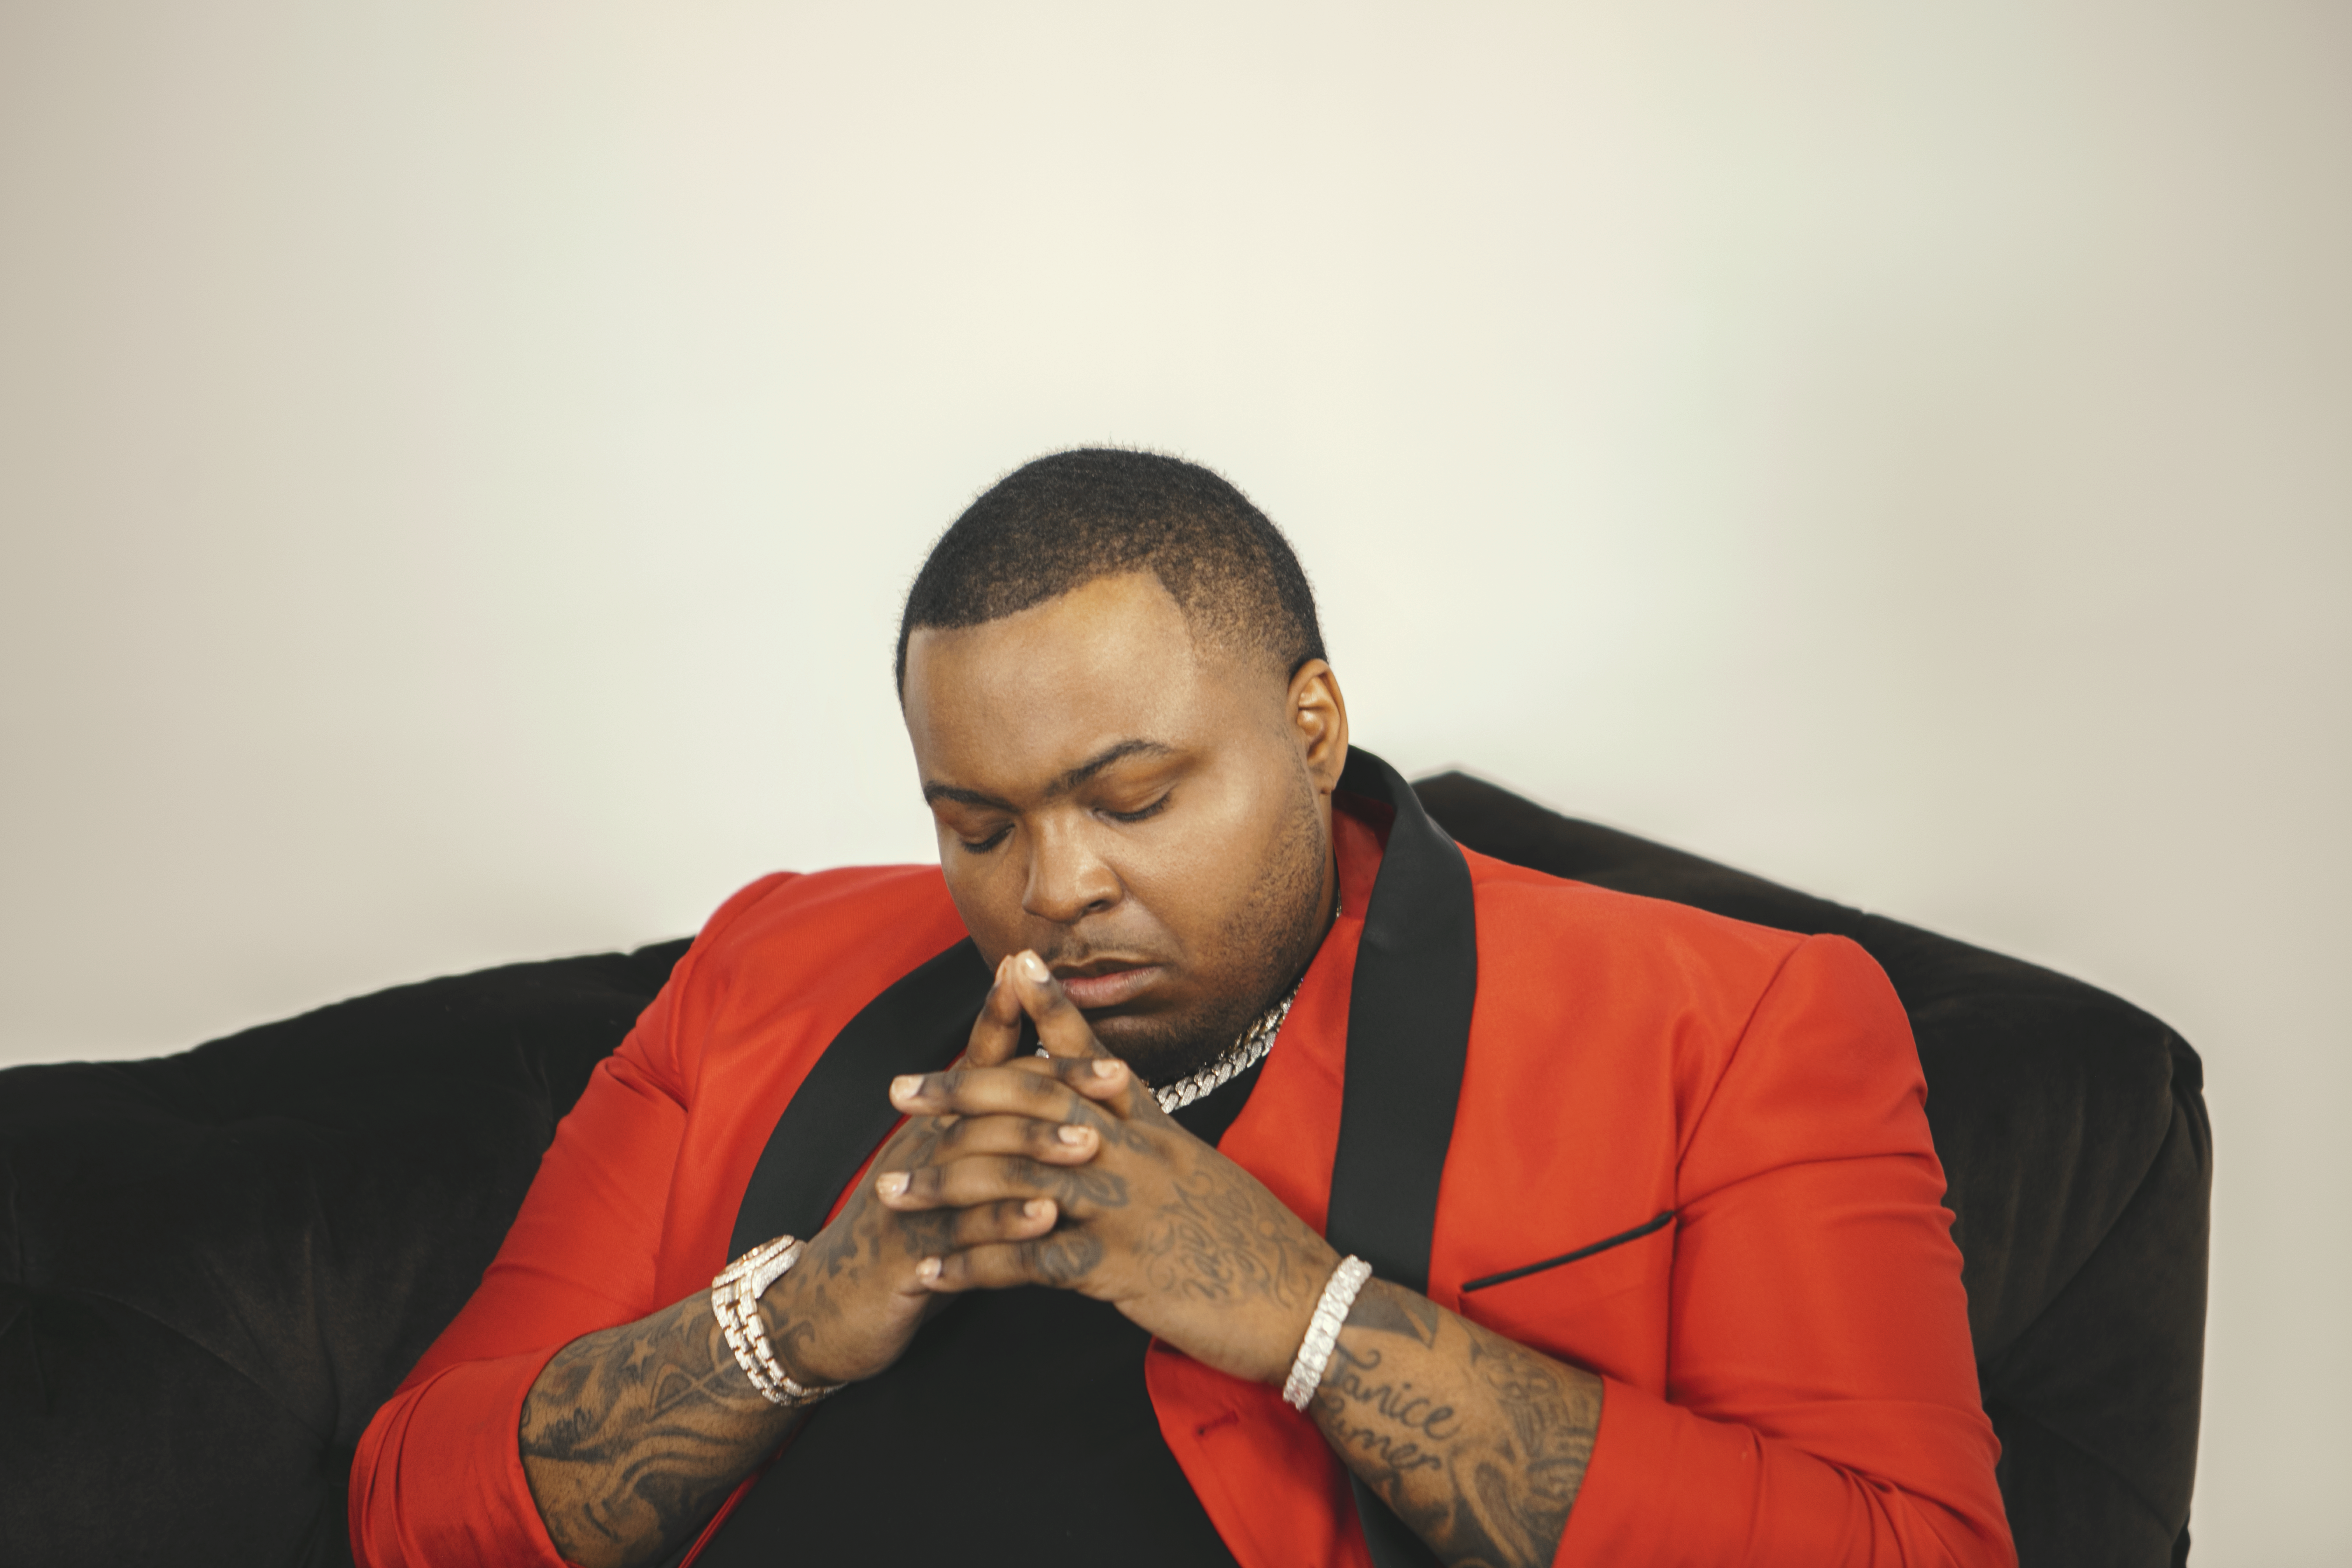 LIGHT IN THE DARKEST TIME: An Interview with Sean Kingston